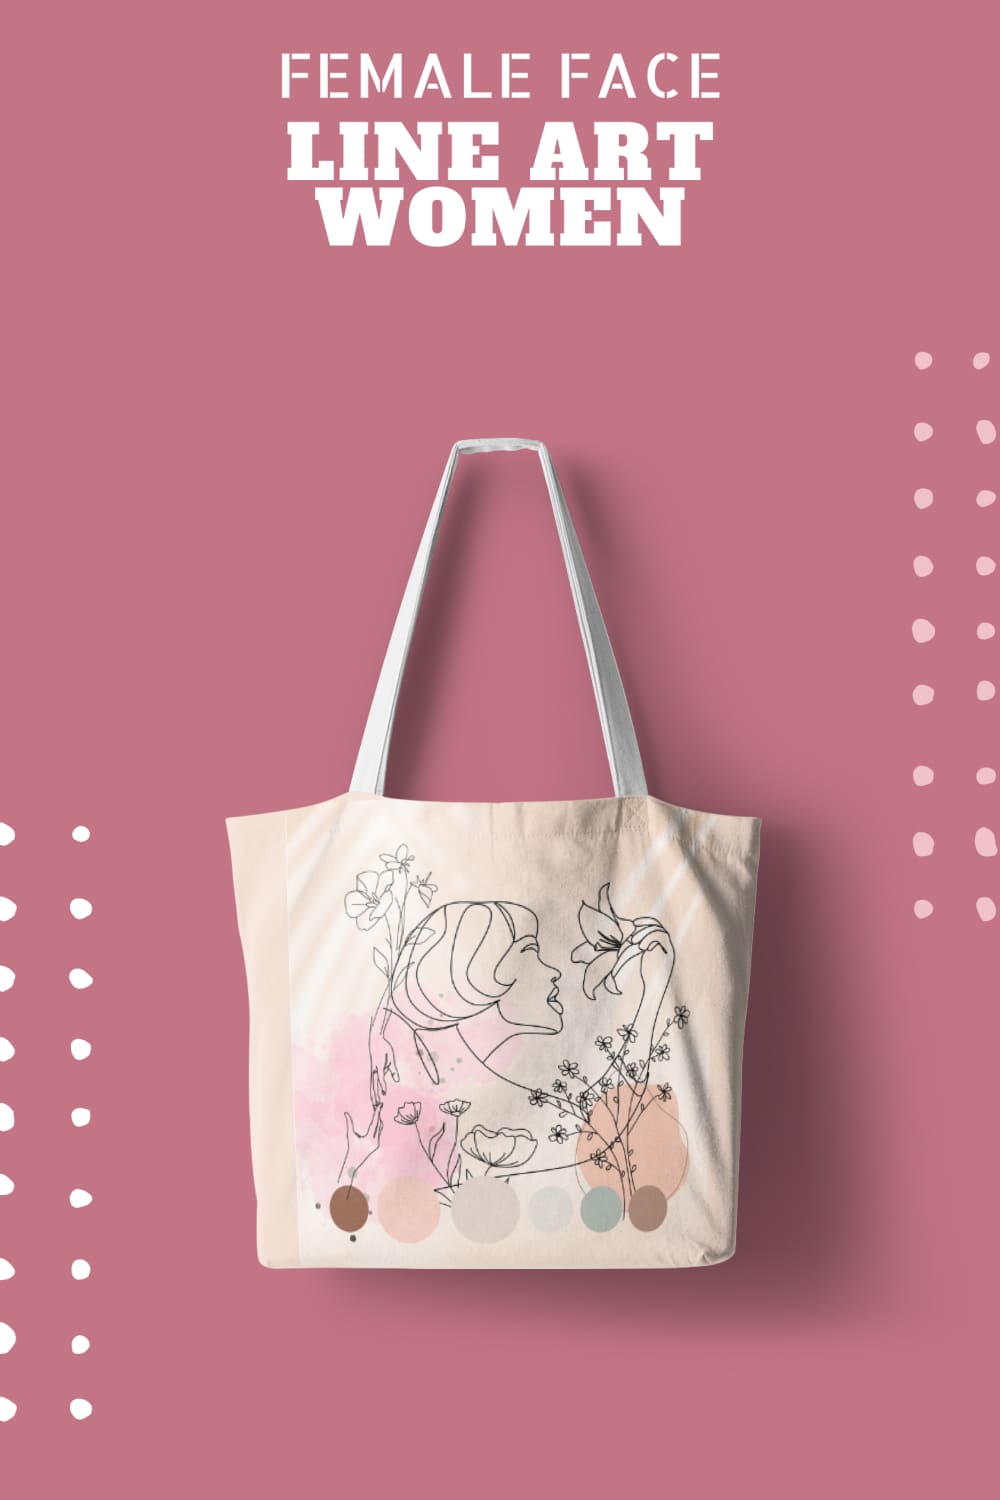 Image of a bag with an irresistible print of a woman's face line art.